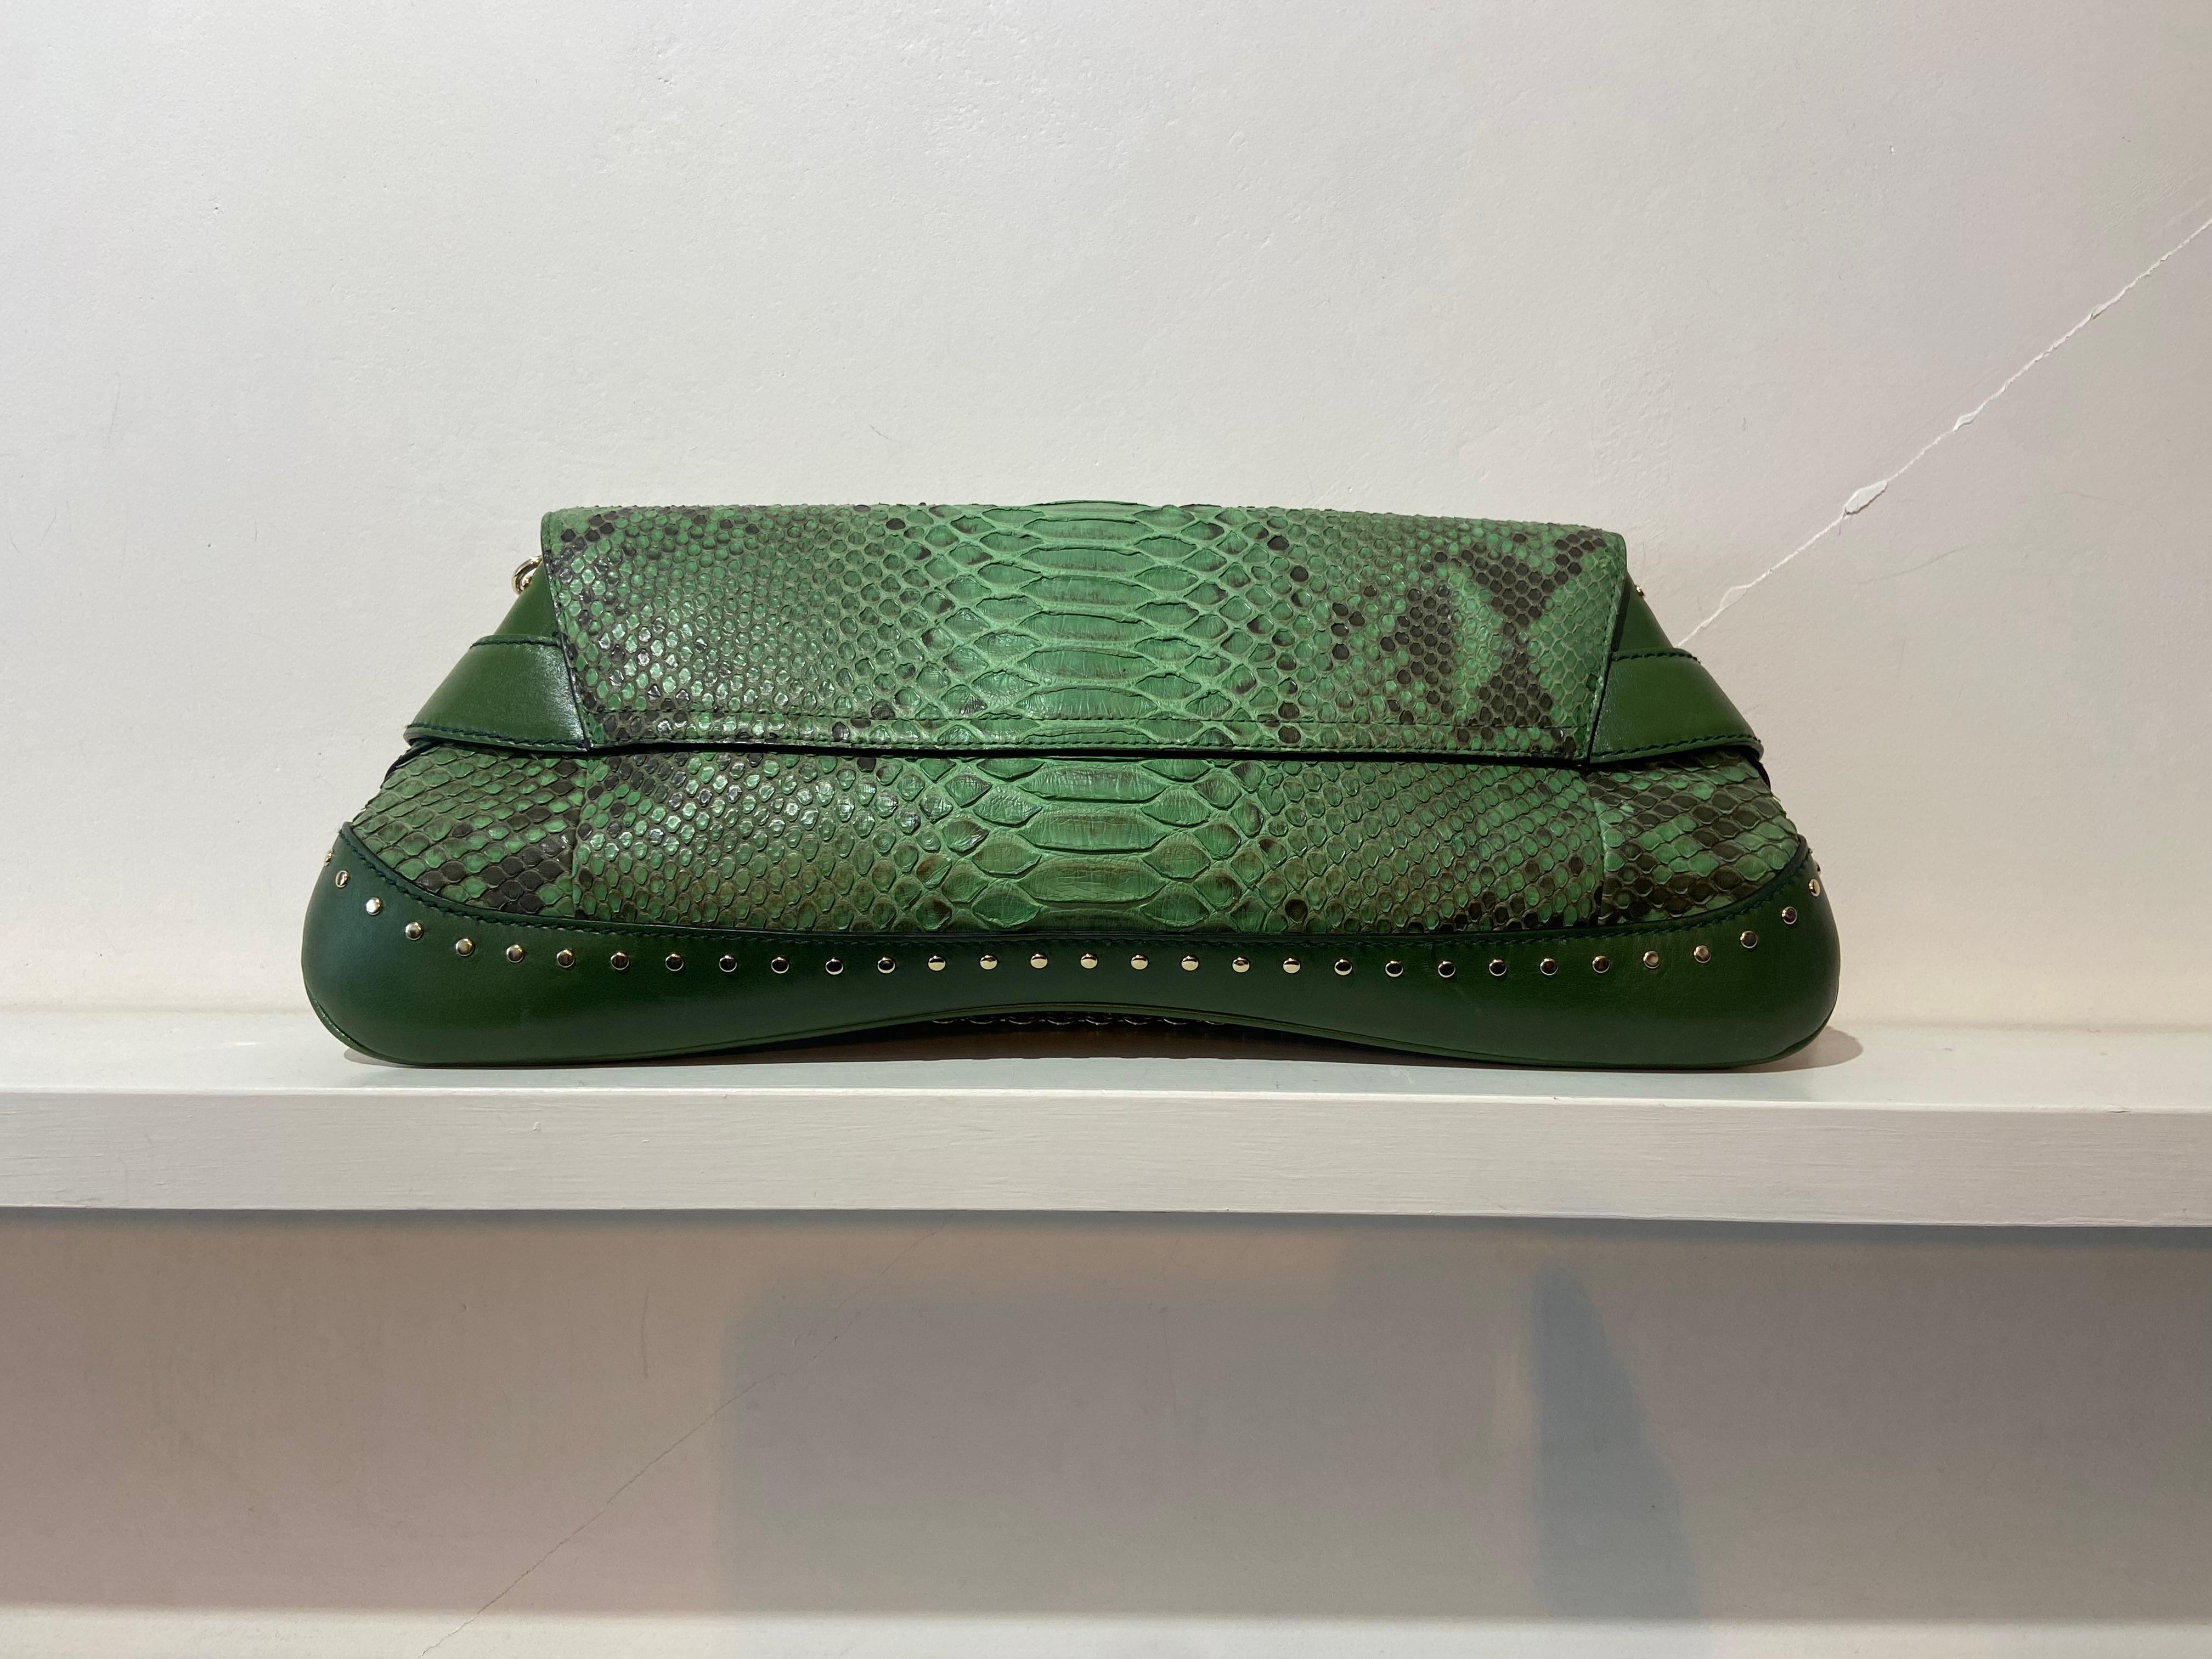 Gucci by Tom Ford 2004 Green Lizard Clutch. Features all-over green lizard detailing, with green leather bottom studded with silver detailing, silver horsebit hardware encompassed with green leather, detachable shoulder chain and green suede